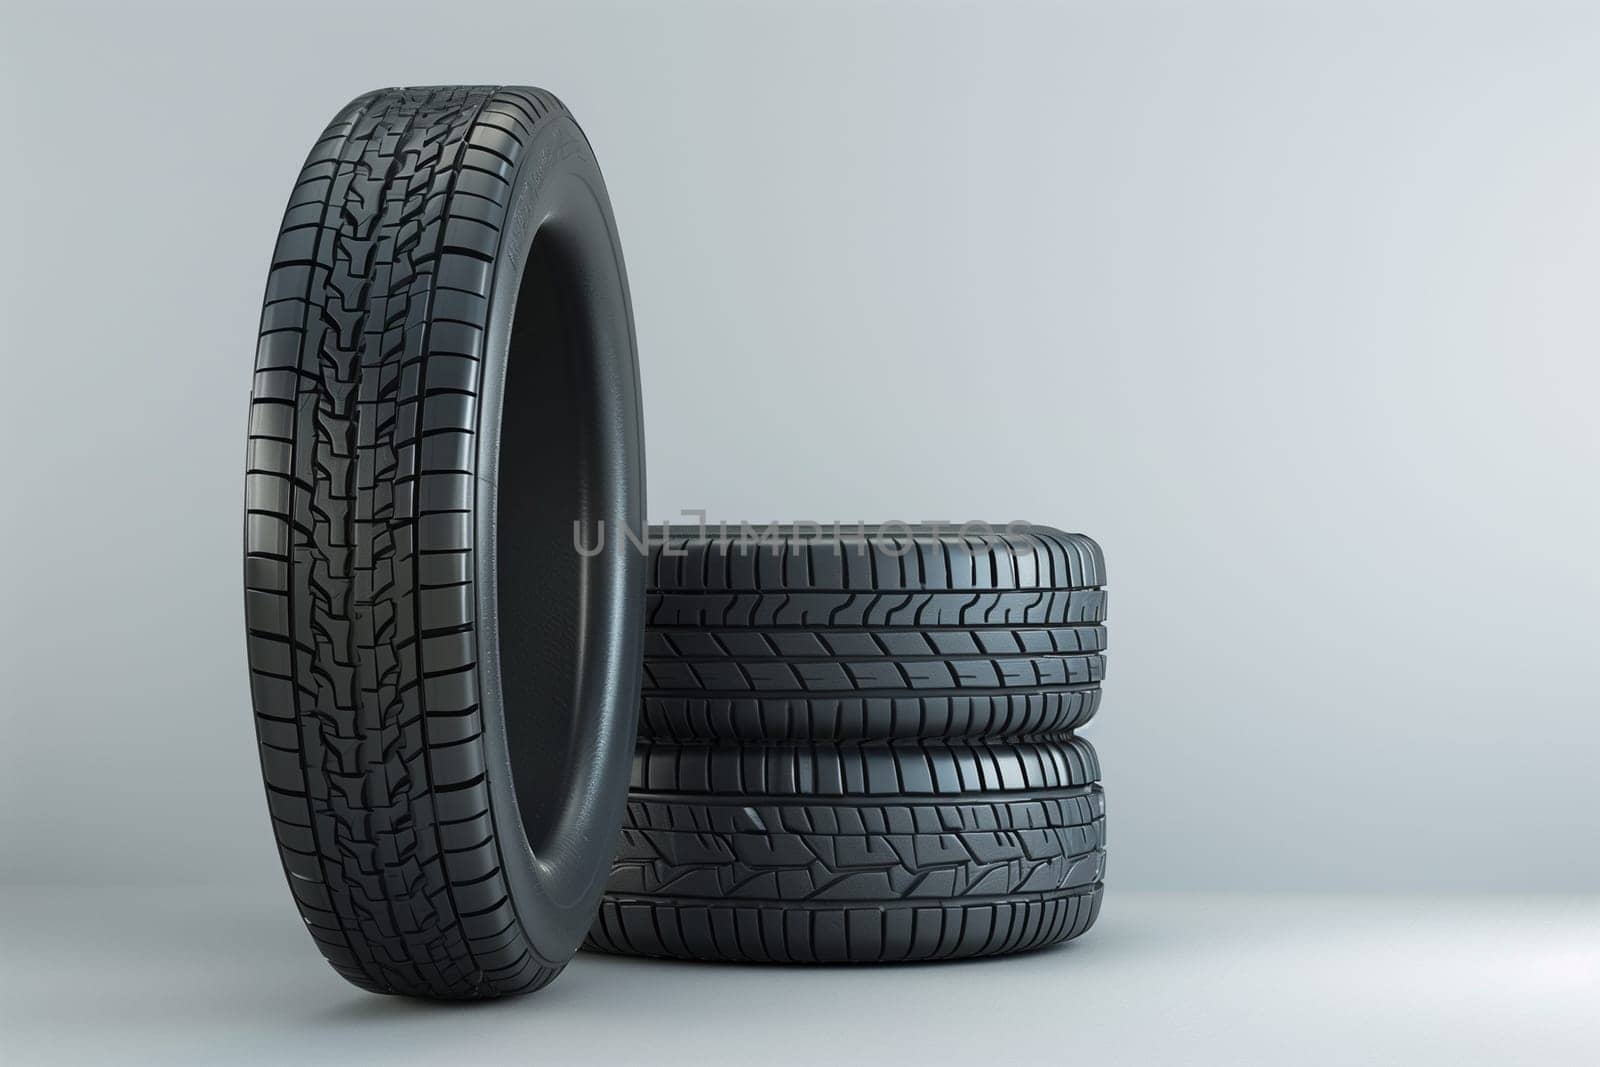 A stack of four tires, each one neatly placed on top of the other, creating a vertical arrangement of rubber wheels.